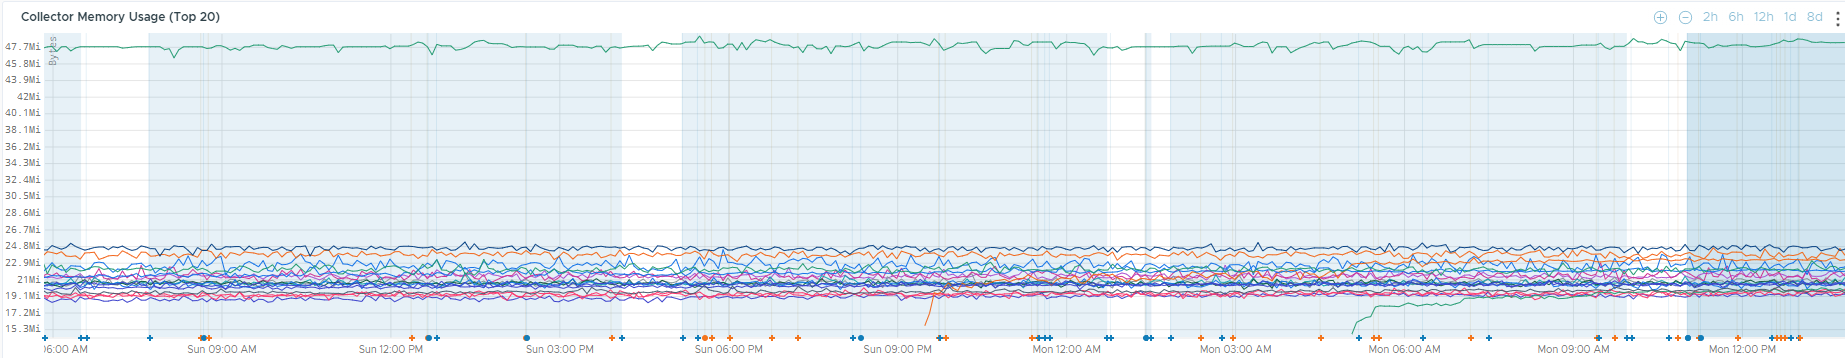 Screenshot of the Collector Memory Usage Chart